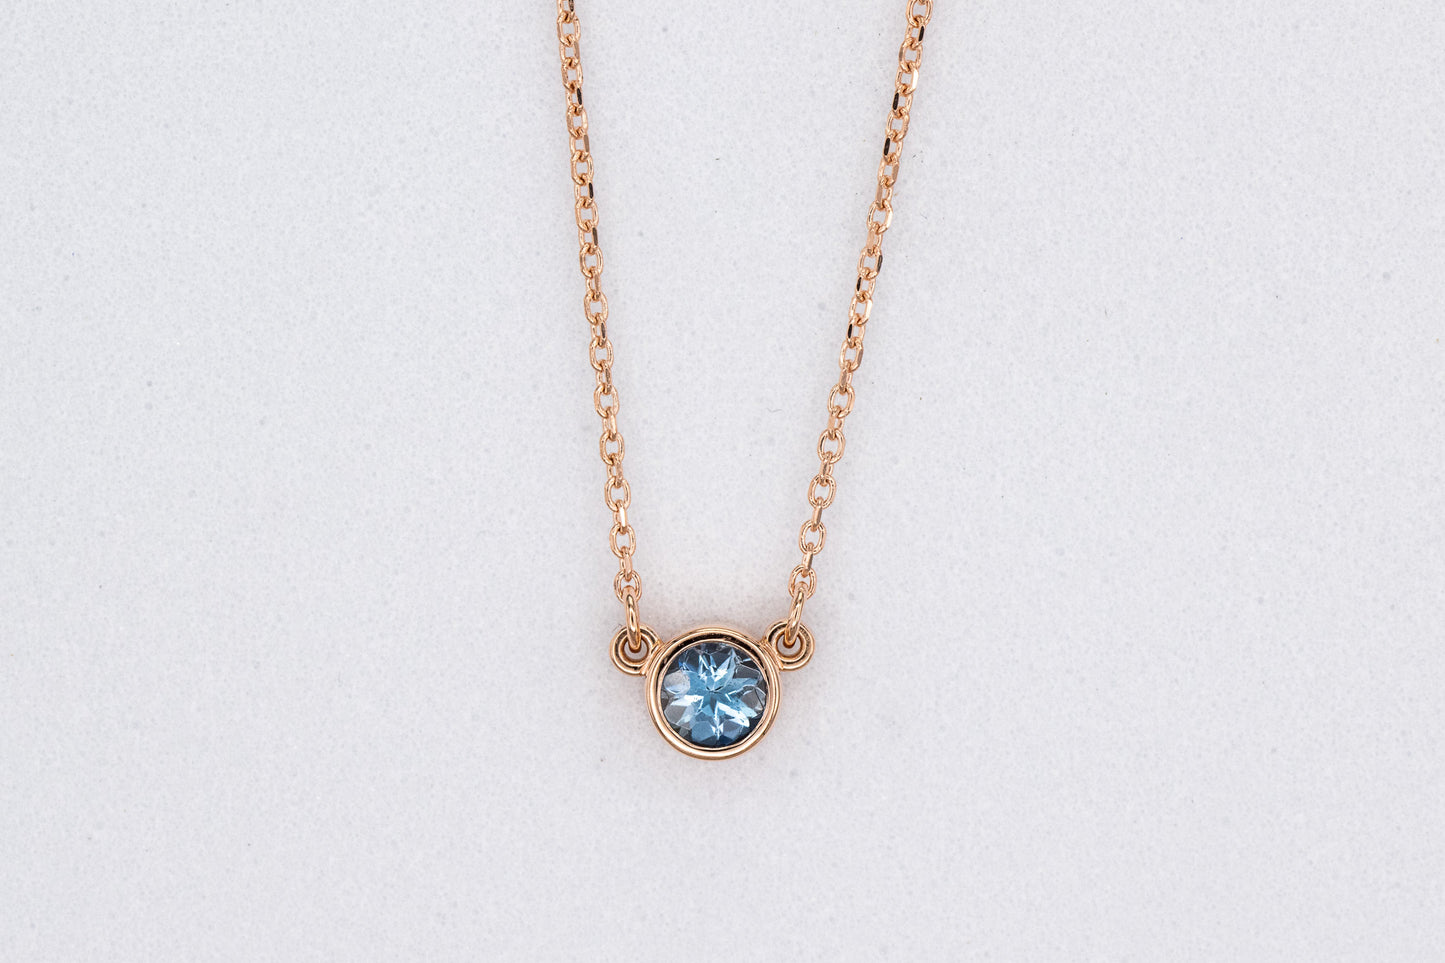 Handmade Aquamarine Rose Gold Necklace by Cassin Jewelry.